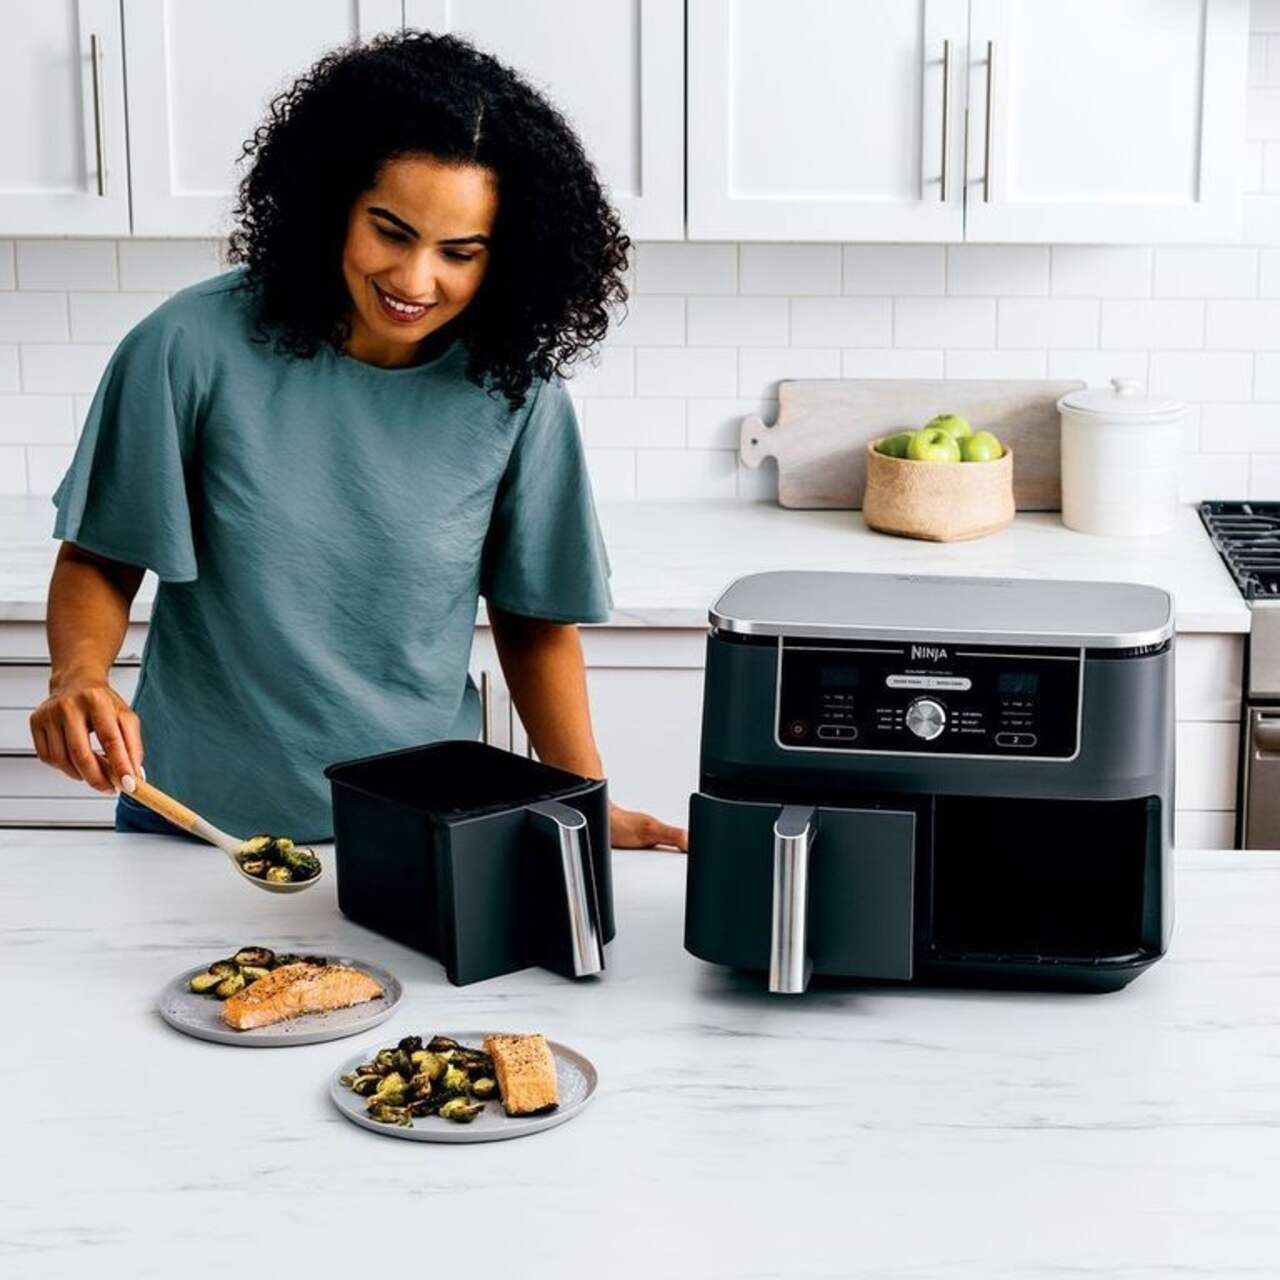 https://media-www.canadiantire.ca/product/living/kitchen/kitchen-appliances/0430955/ninja-foodi-xl-dual-zone-air-fryer-0a5e8768-29d4-40d1-9398-a9f84330c710-jpgrendition.jpg?imdensity=1&imwidth=1244&impolicy=mZoom